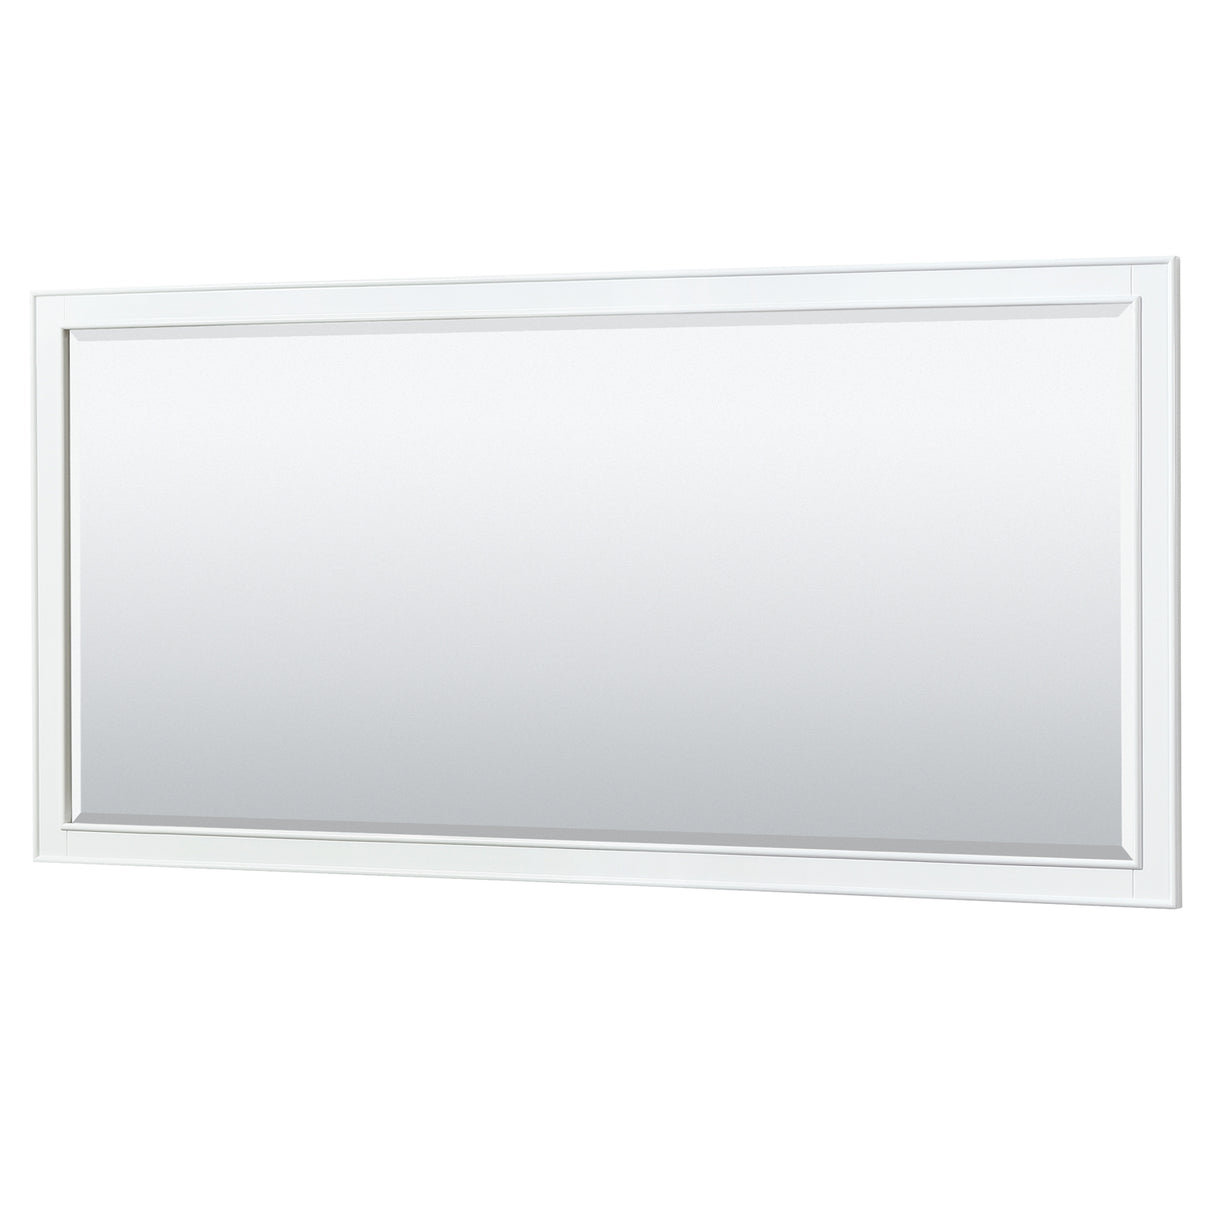 Deborah 80 Inch Double Bathroom Vanity in White White Cultured Marble Countertop Undermount Square Sinks Brushed Gold Trim 70 Inch Mirror